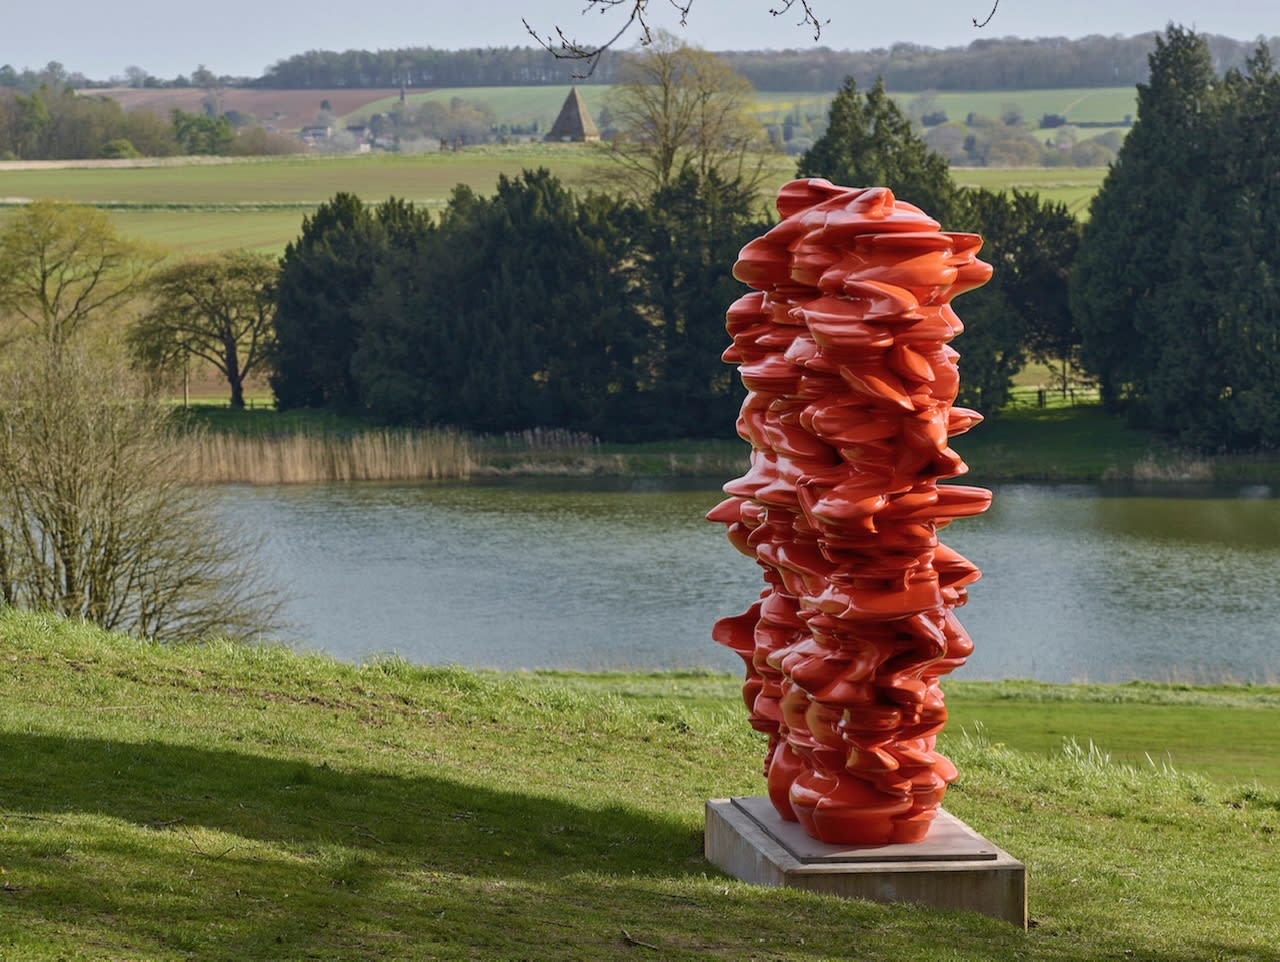 Tony Cragg interview ‘Art has become surrounded by middle-class, intellectual bulls---’